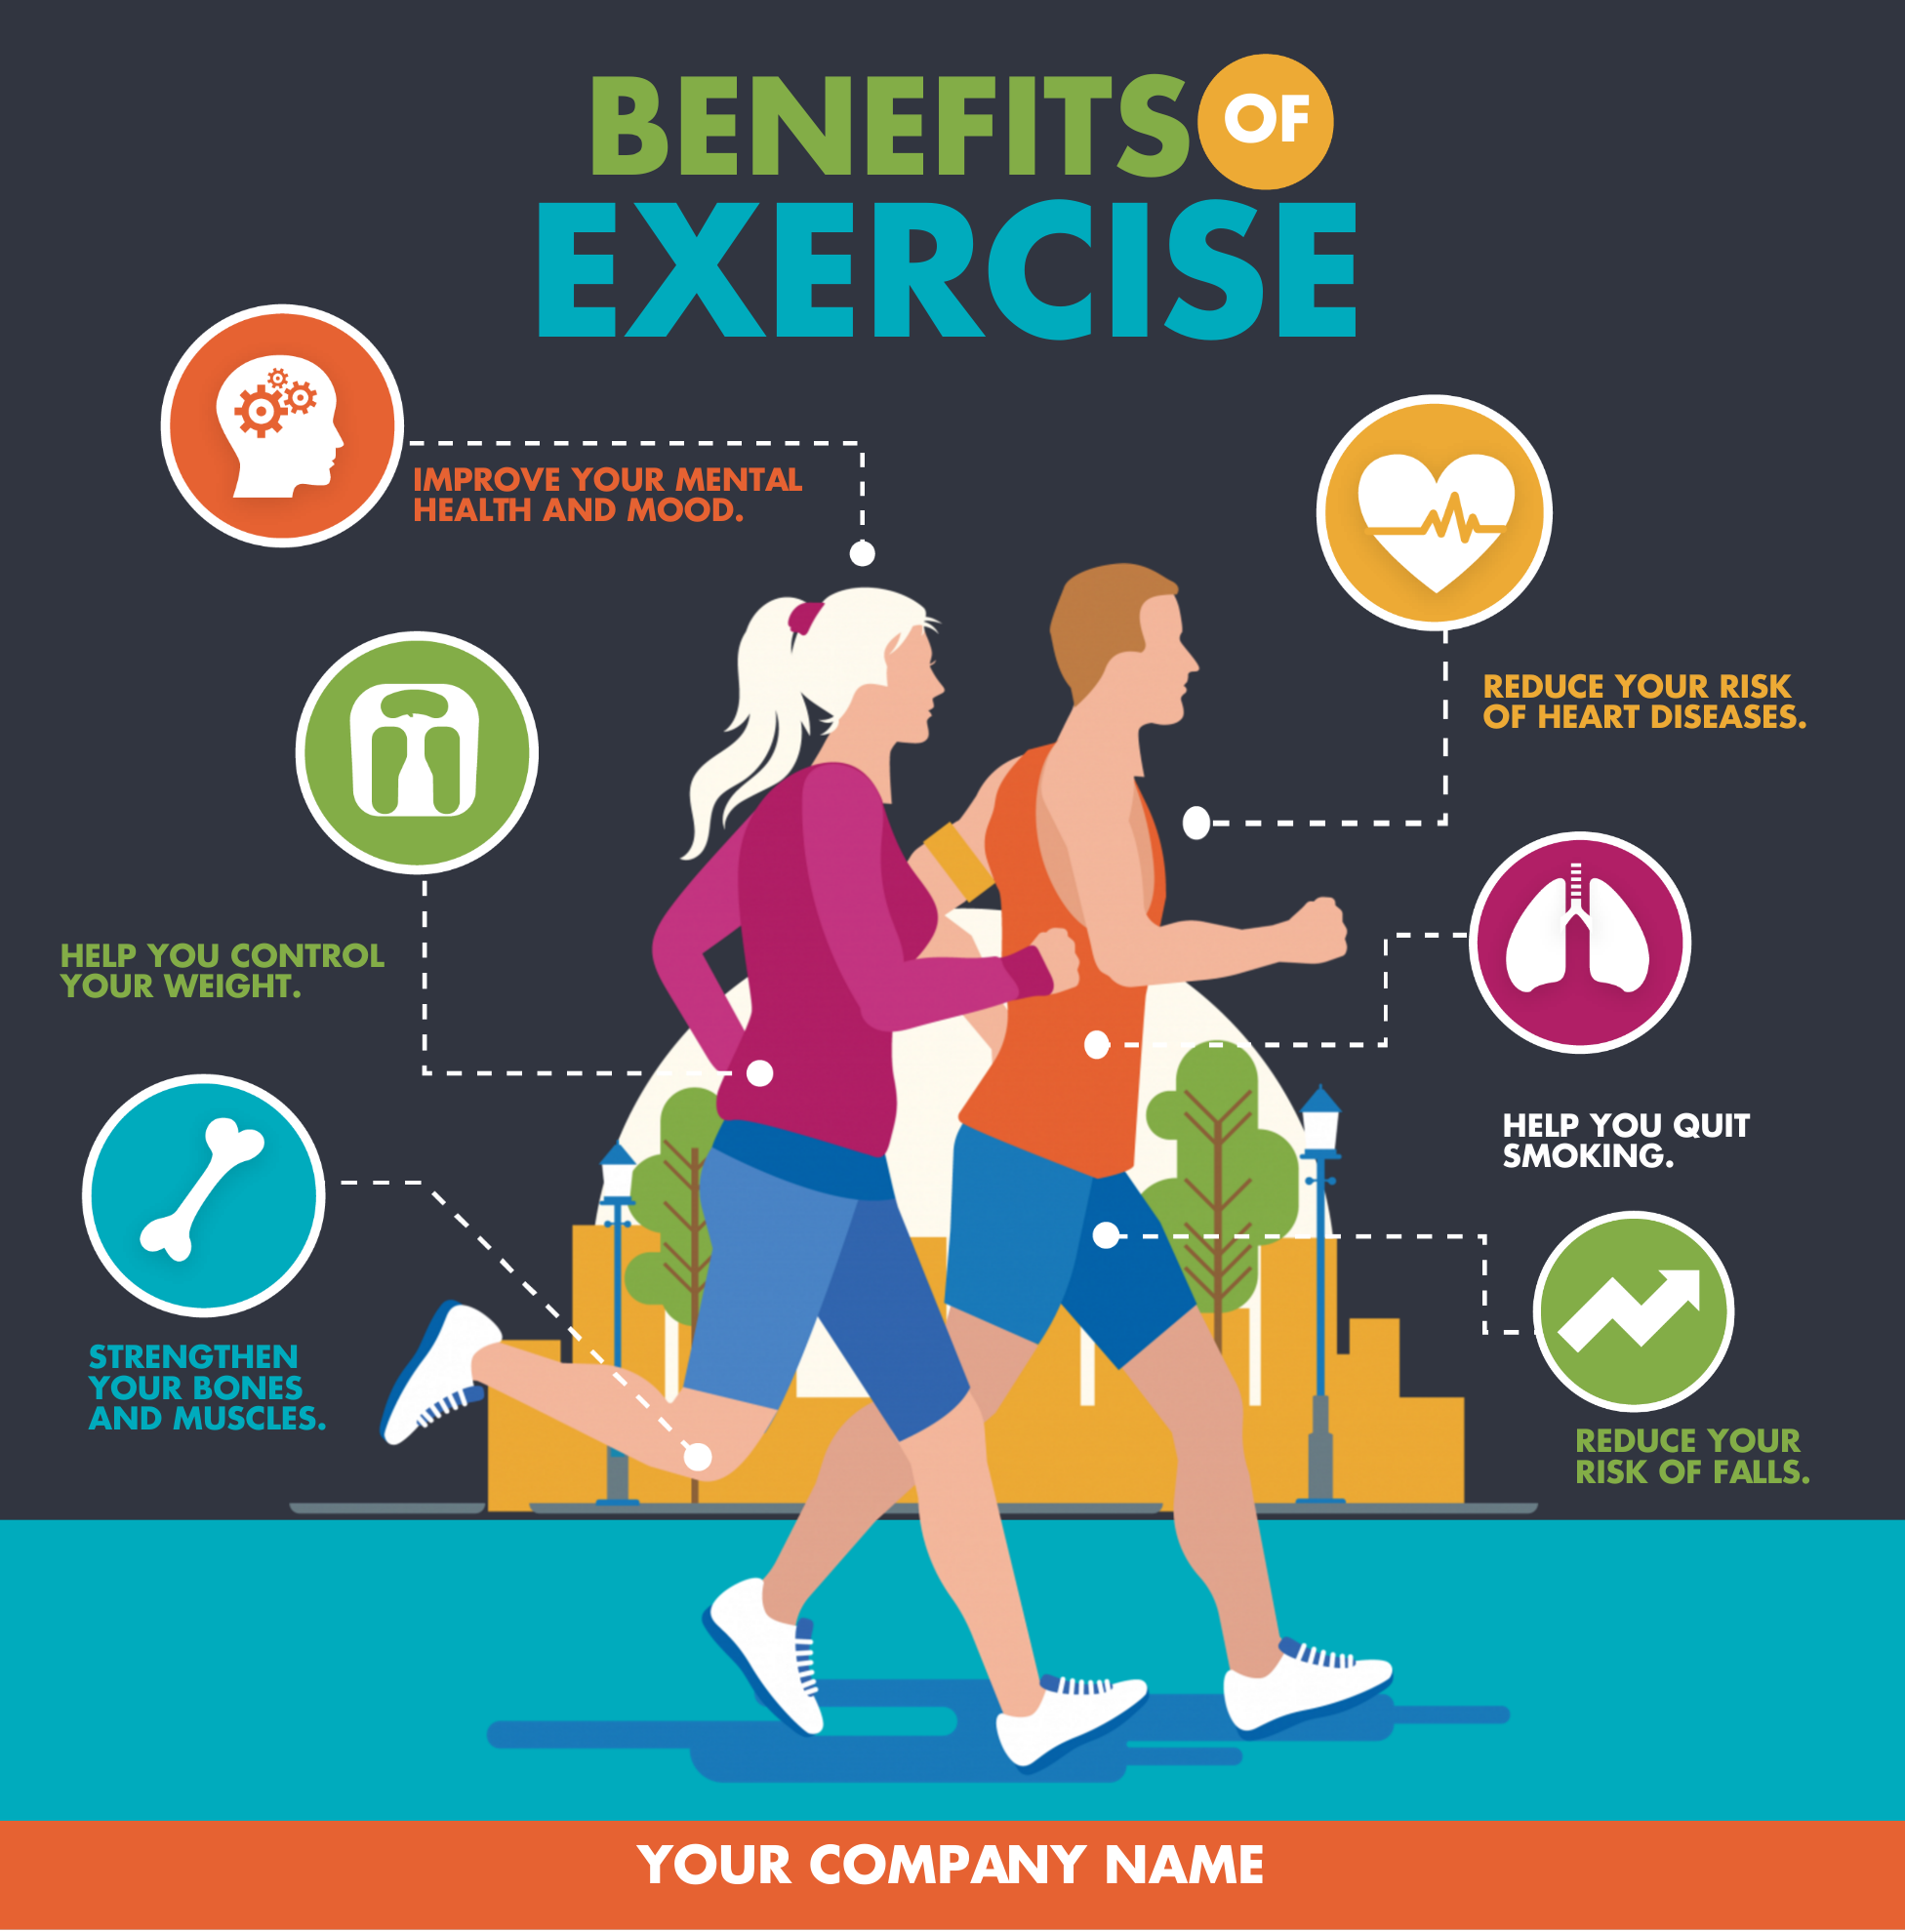 How To Create An Infographic About Exercising